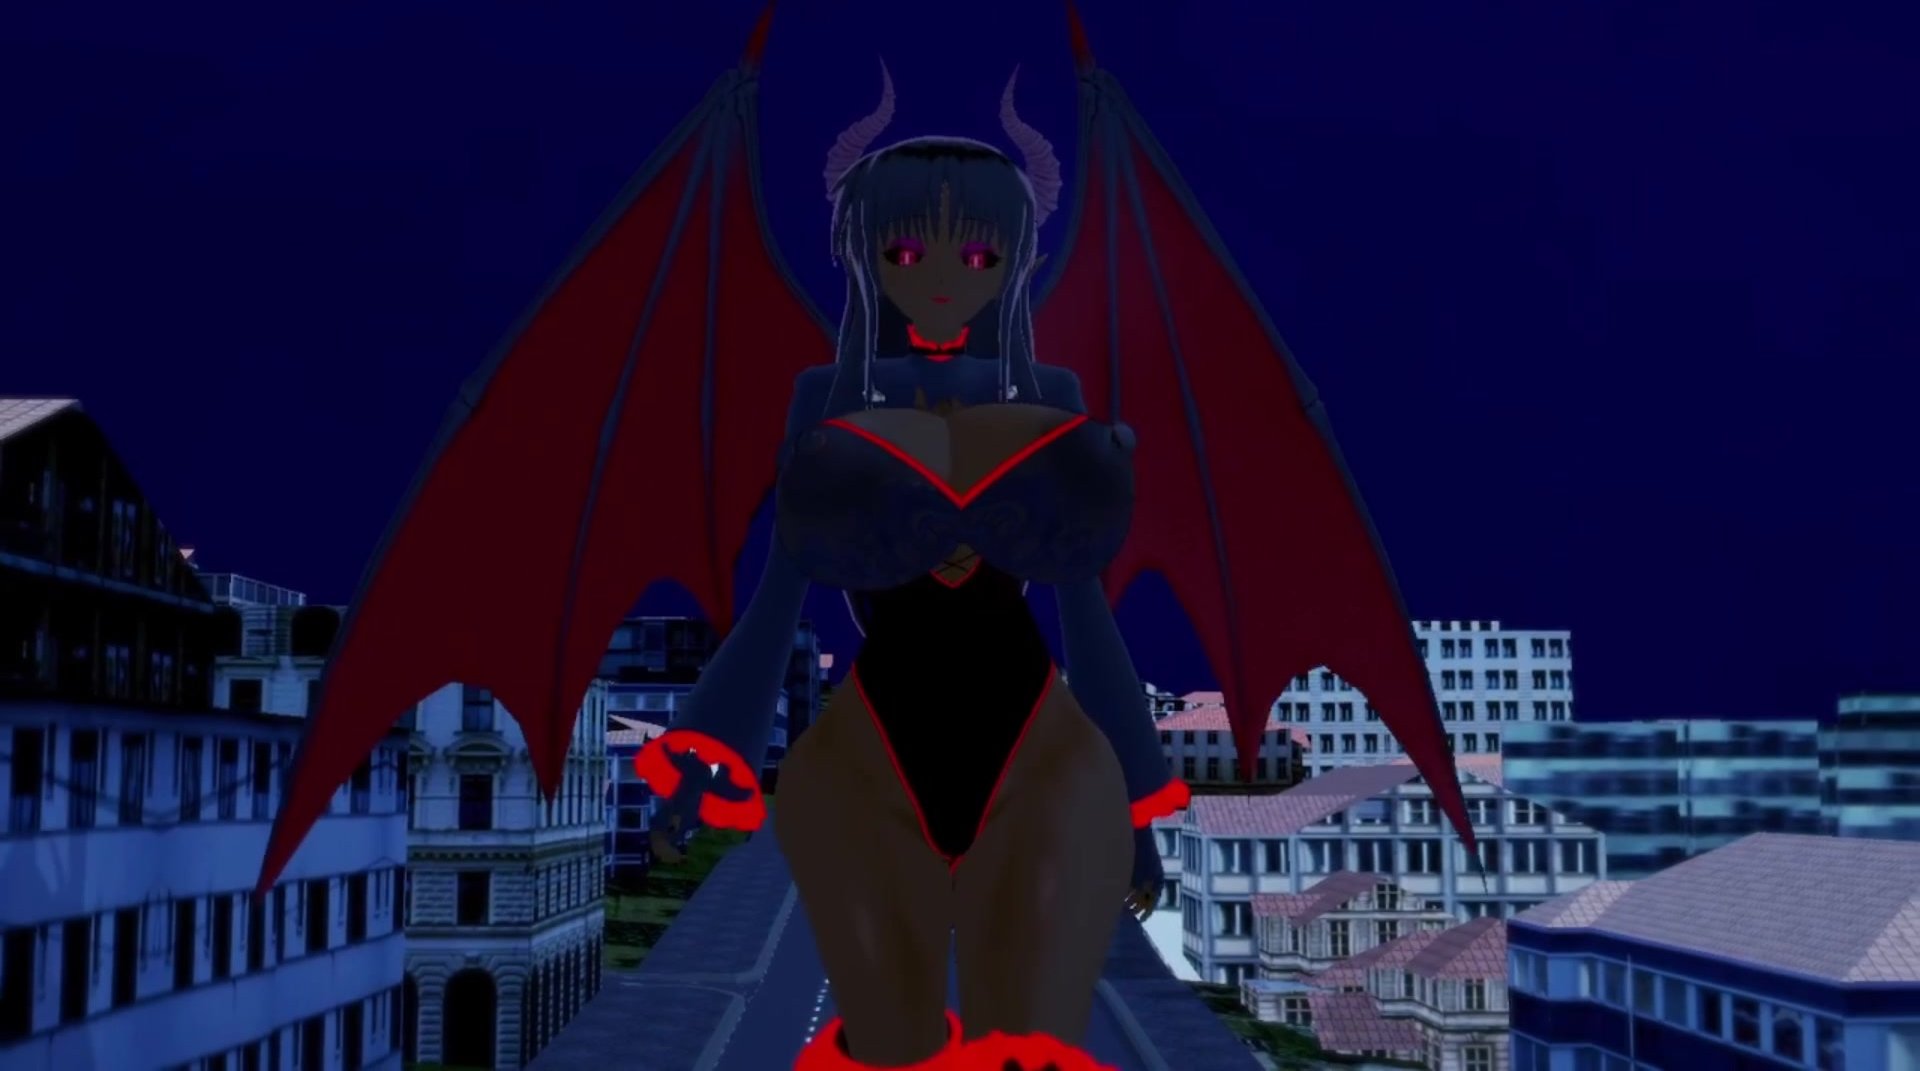 Succubus strolls and grows in the city